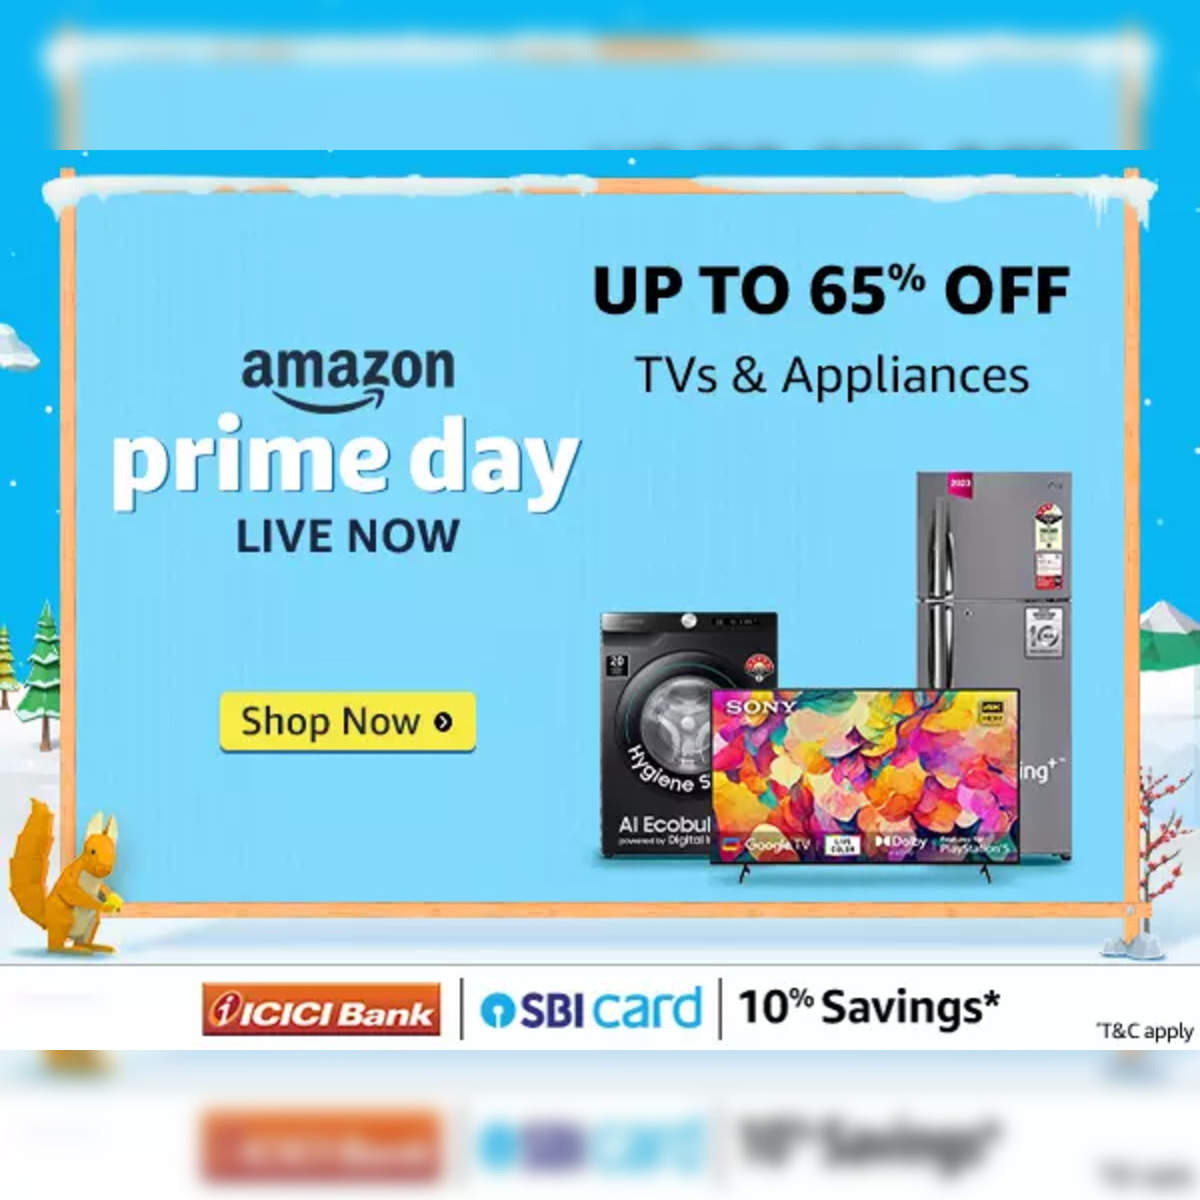 home goods discounted up to 55% off on Prime Day